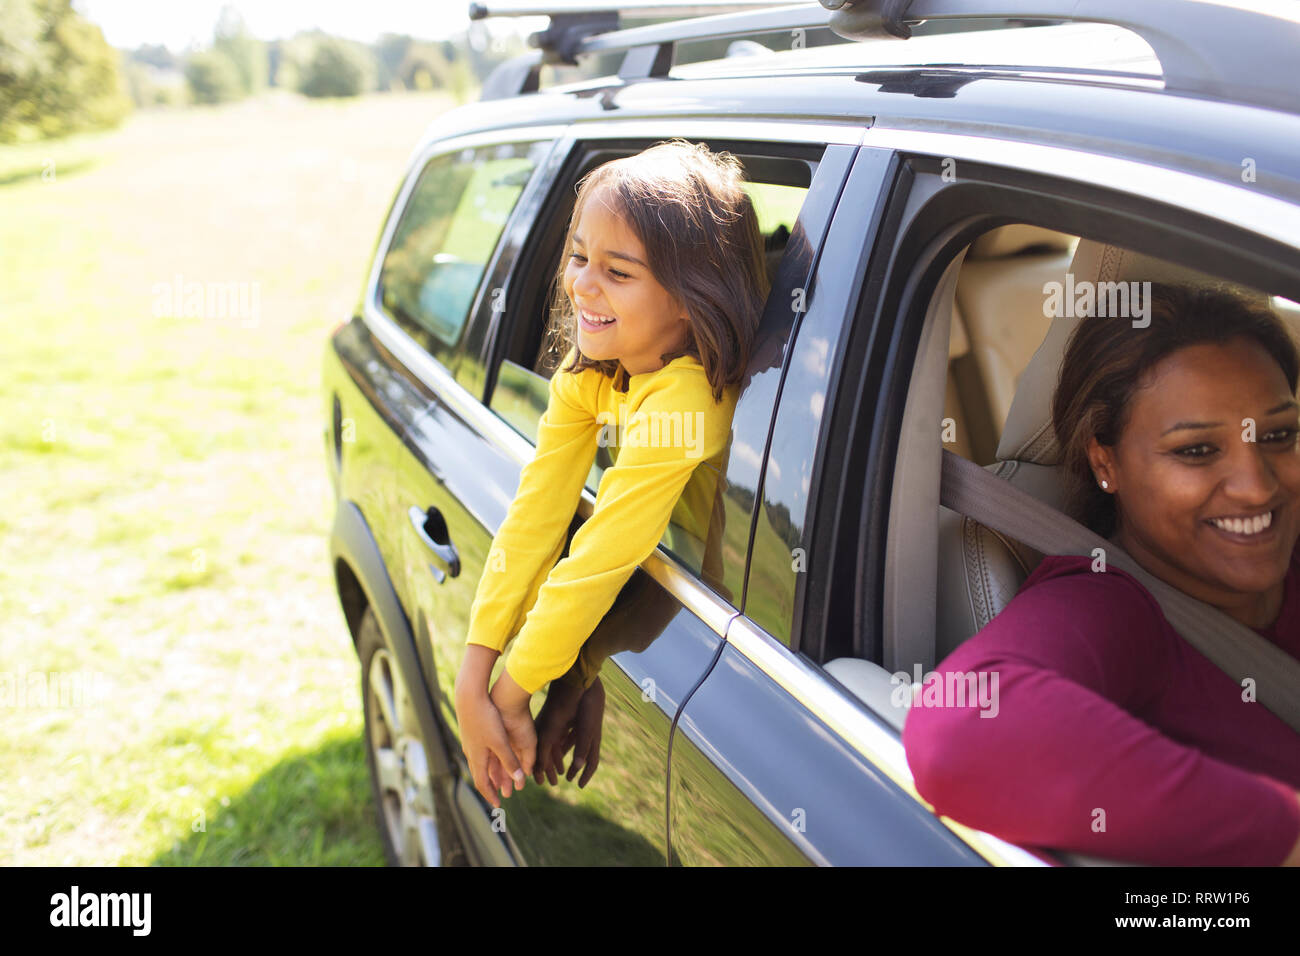 Carefree girl leaning out window of car Stock Photo